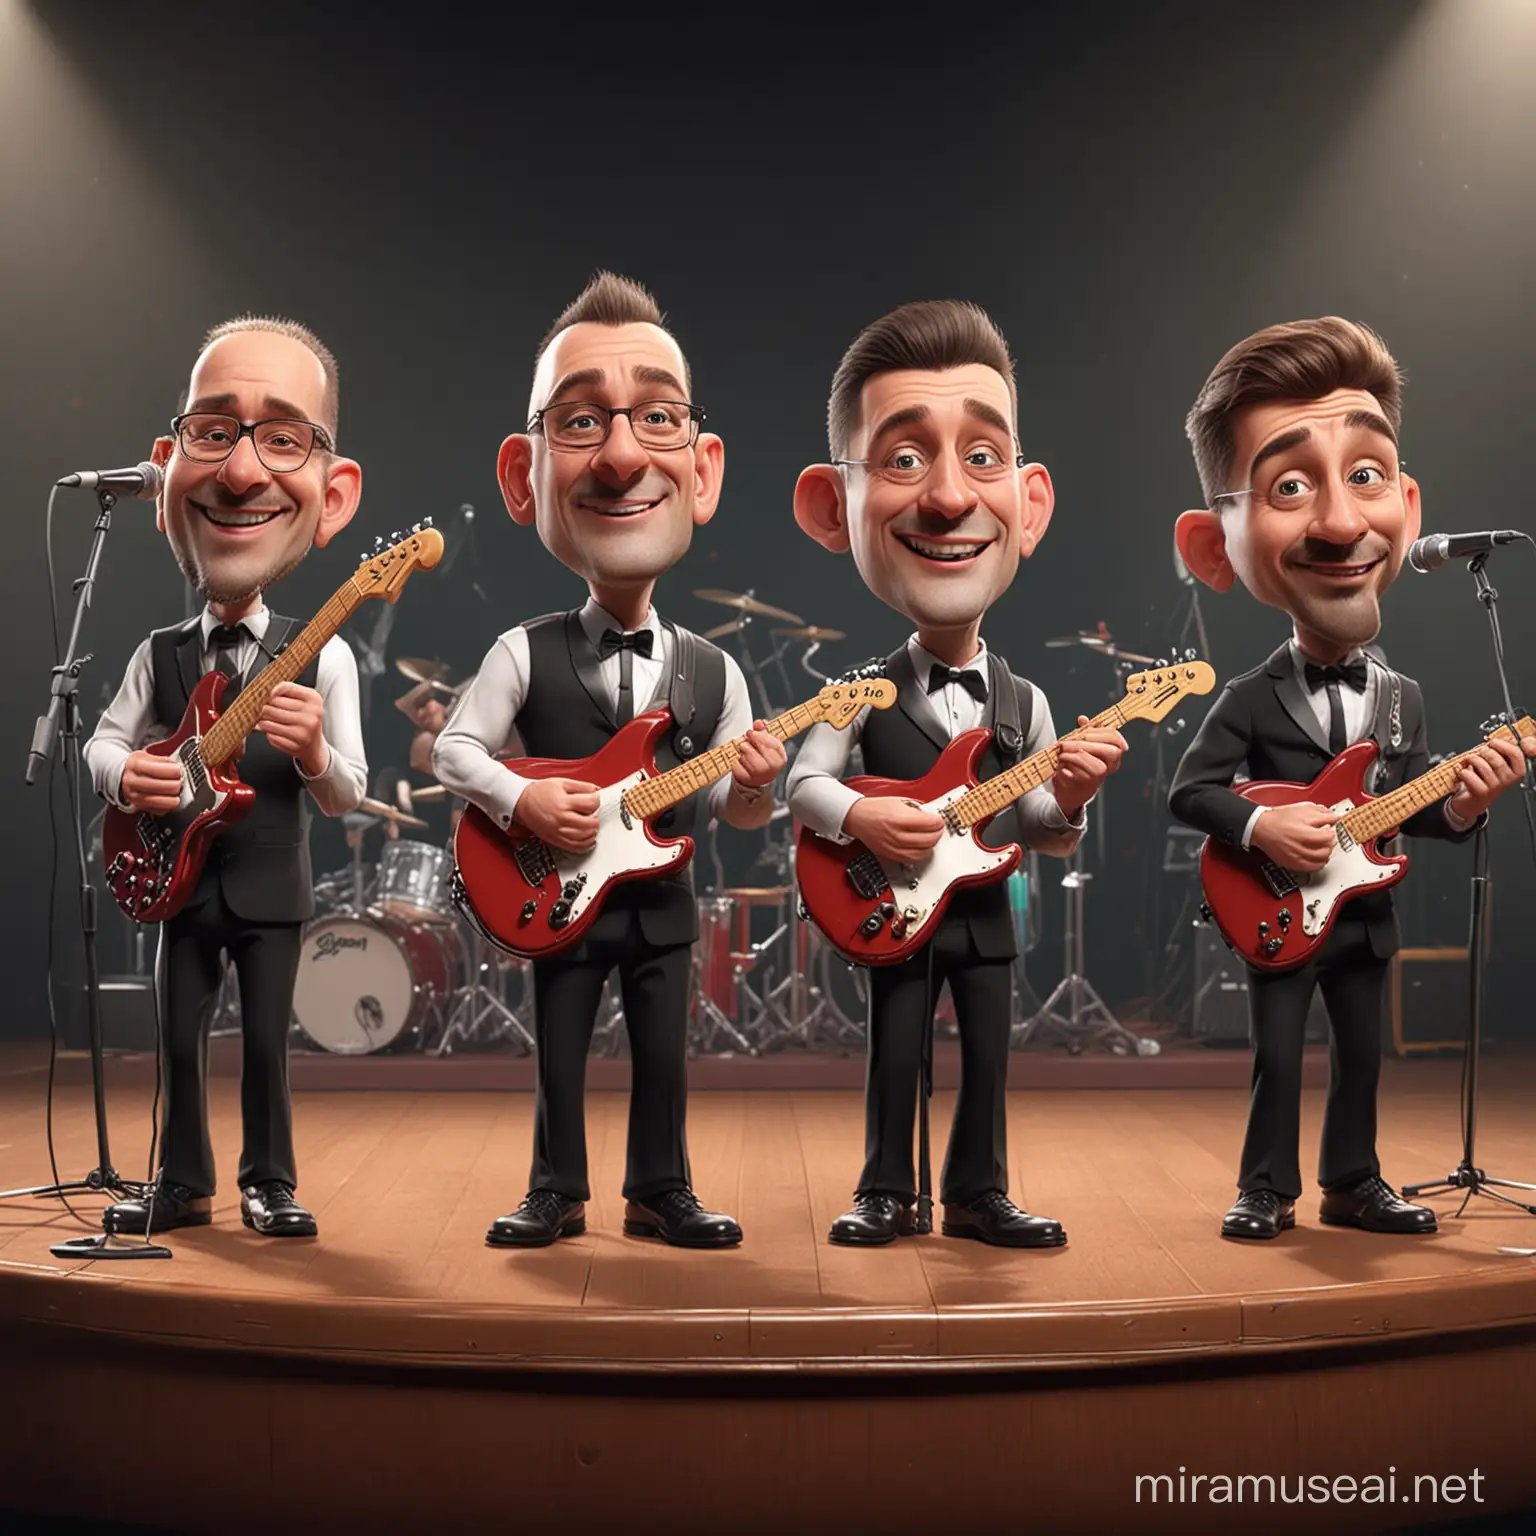 Vibrant 3D Caricature Band Performance by AllMale Ensemble